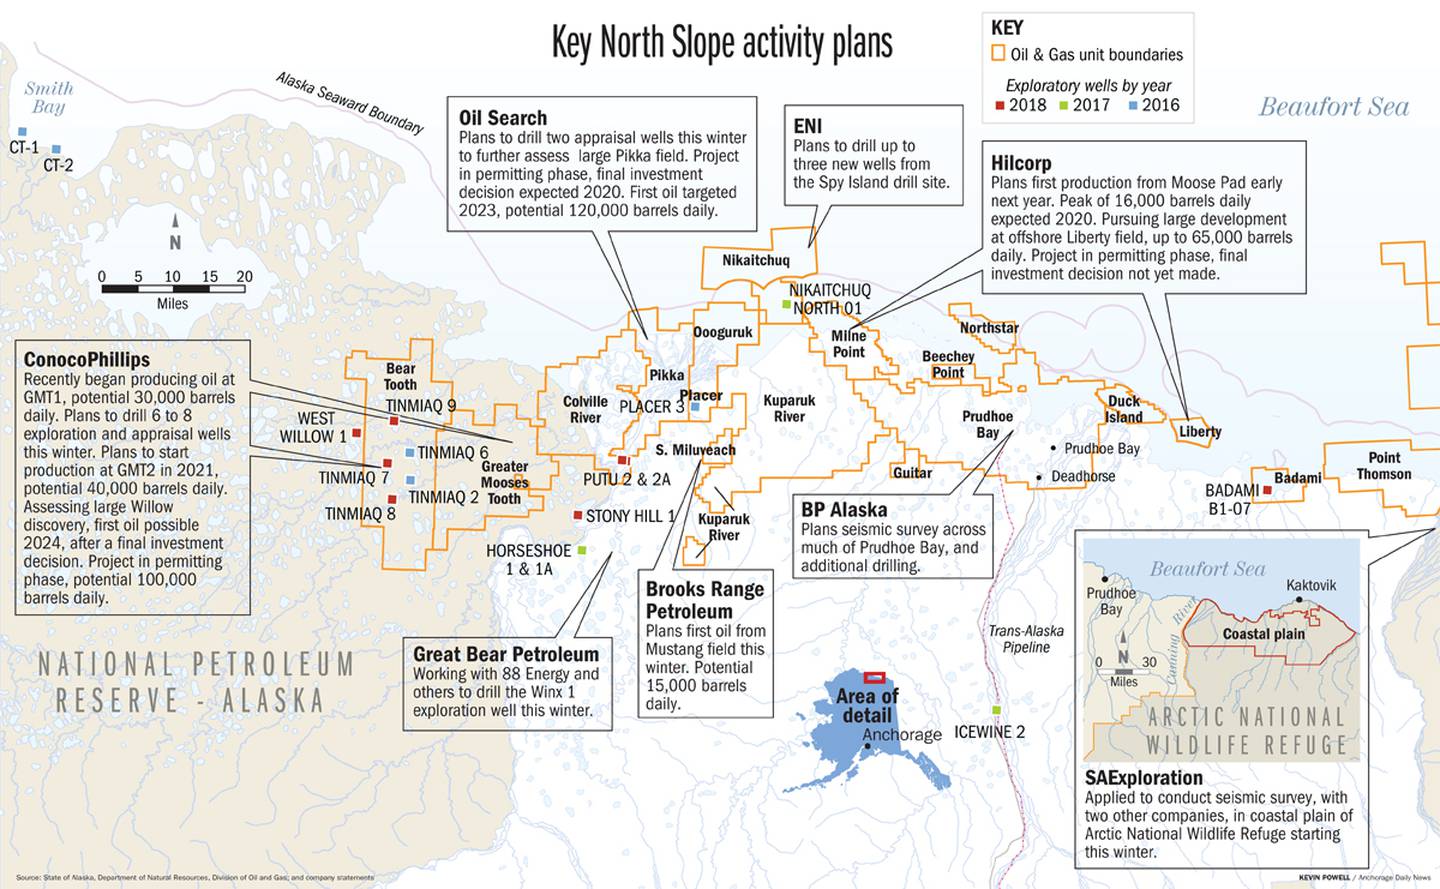 NorthSlope activity plans 2